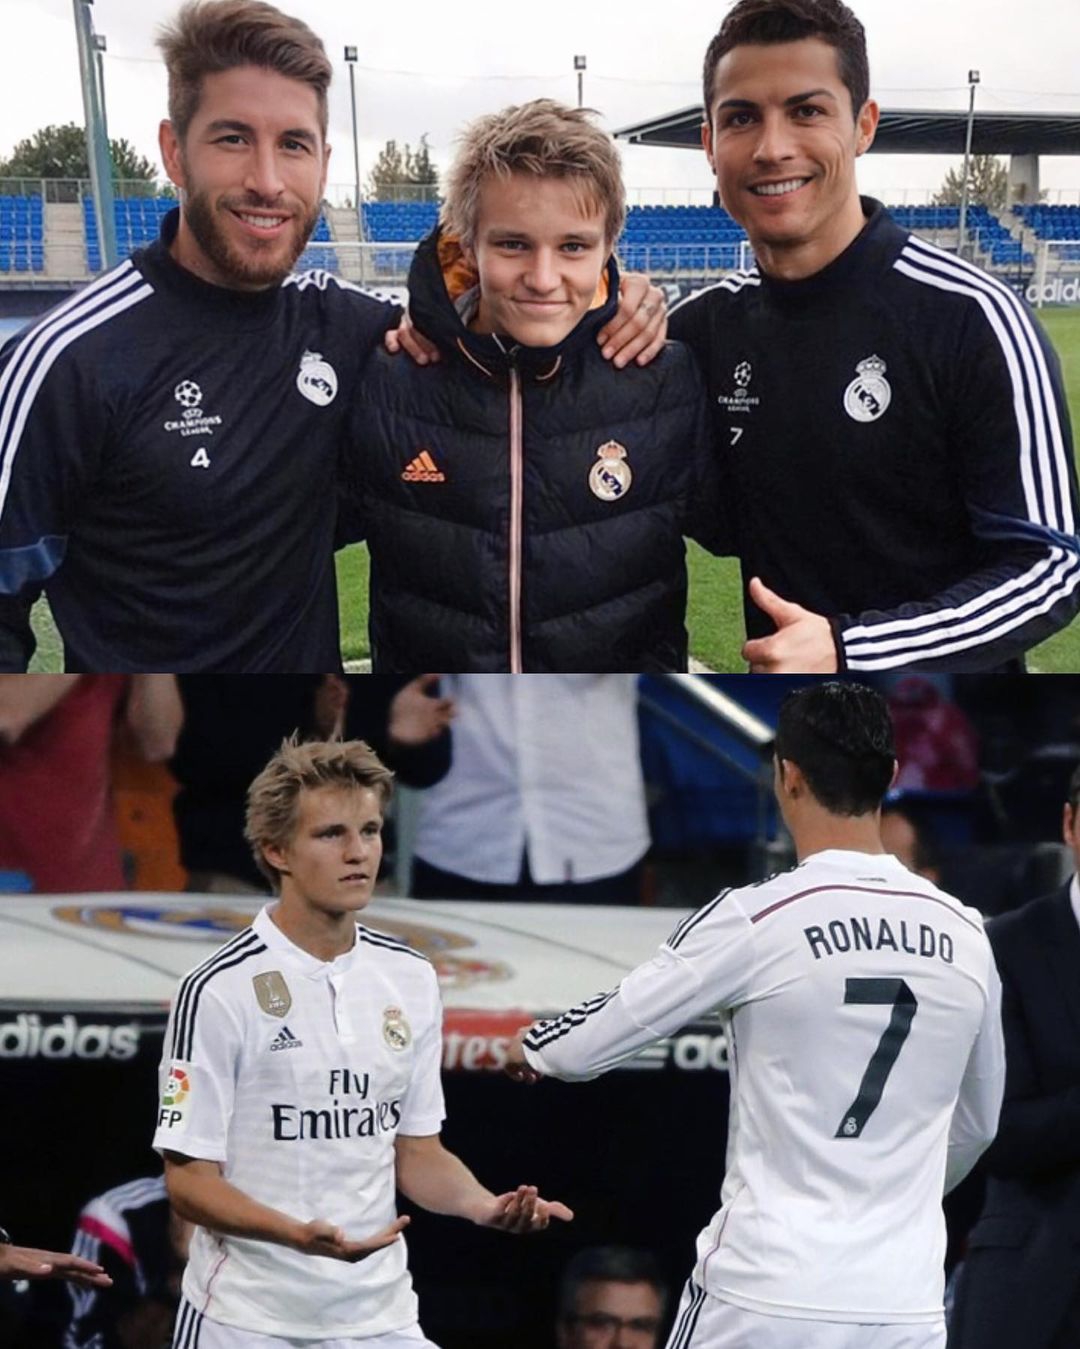 “He is an amazing player & will one day win the Balon D’or” Cristiano Ronaldo Talks About Martin Ødegaard